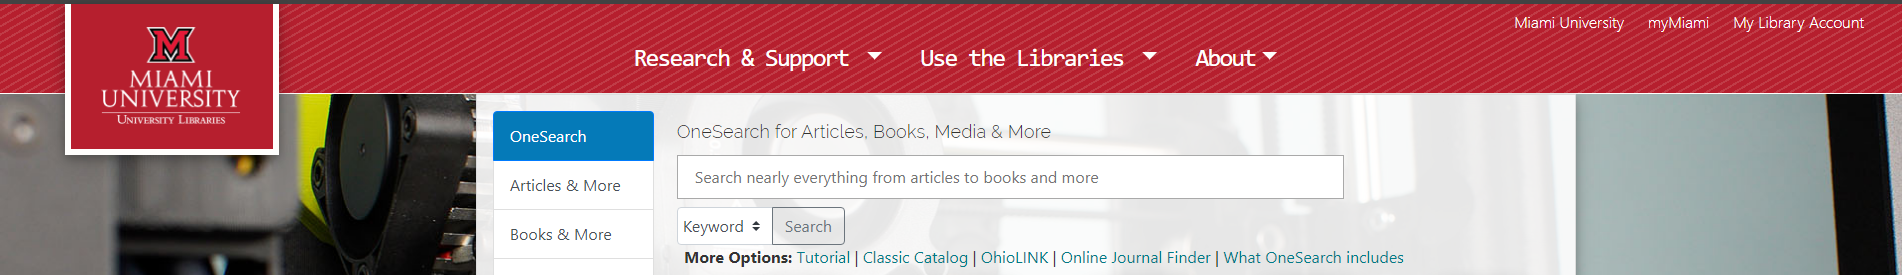 A screenshot of the upper portion of the homepage of the new University Libraries website